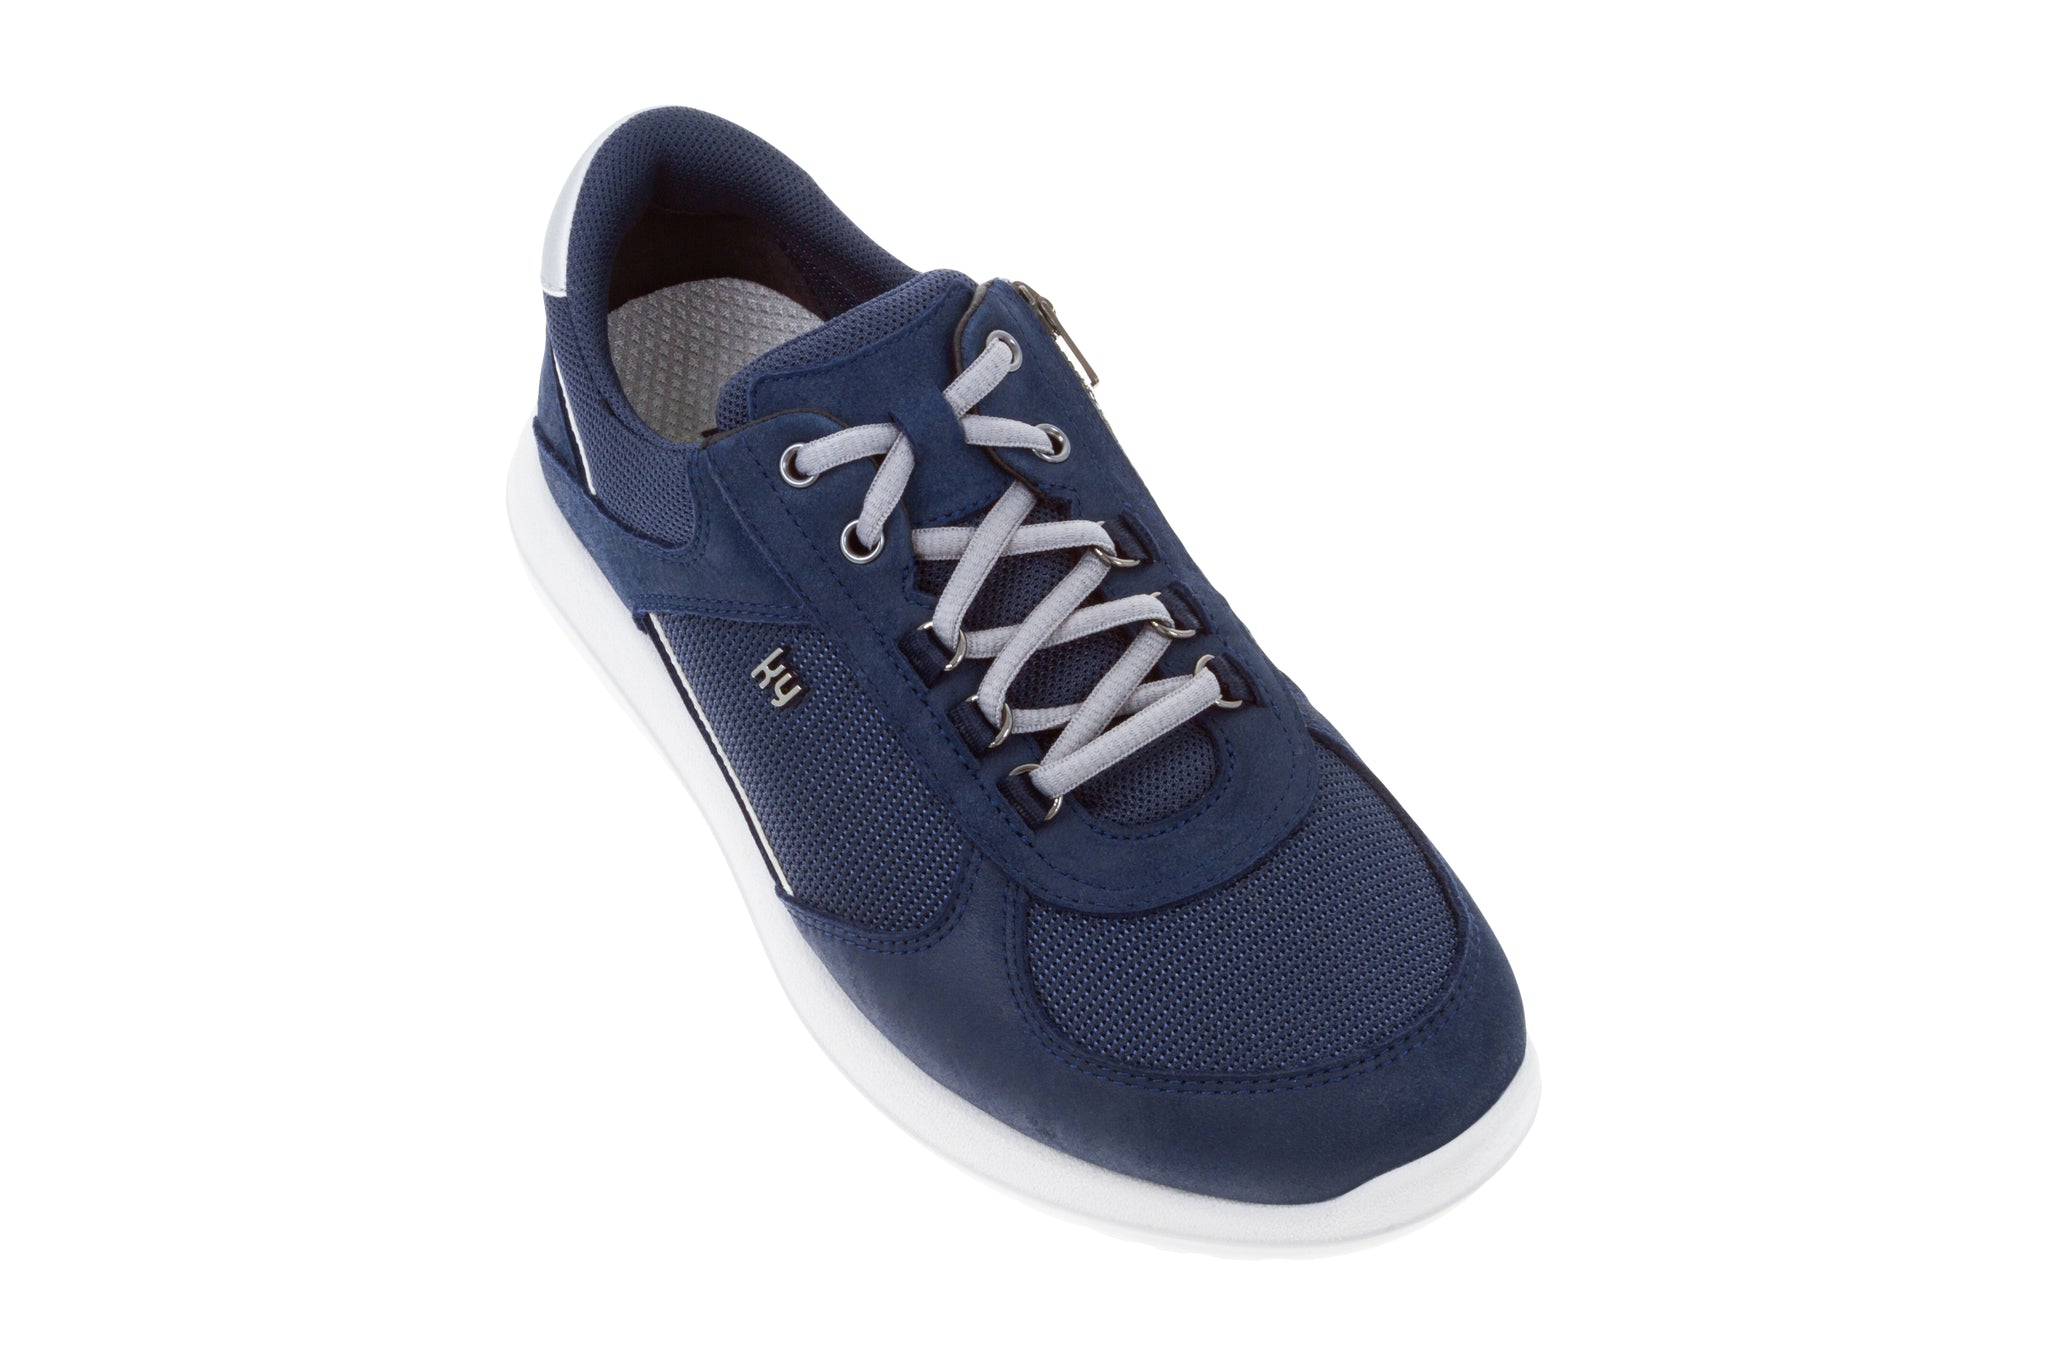 kybun Rolle Navy Traditional and Playful Healthy Shoe for Men – kybun online store USA